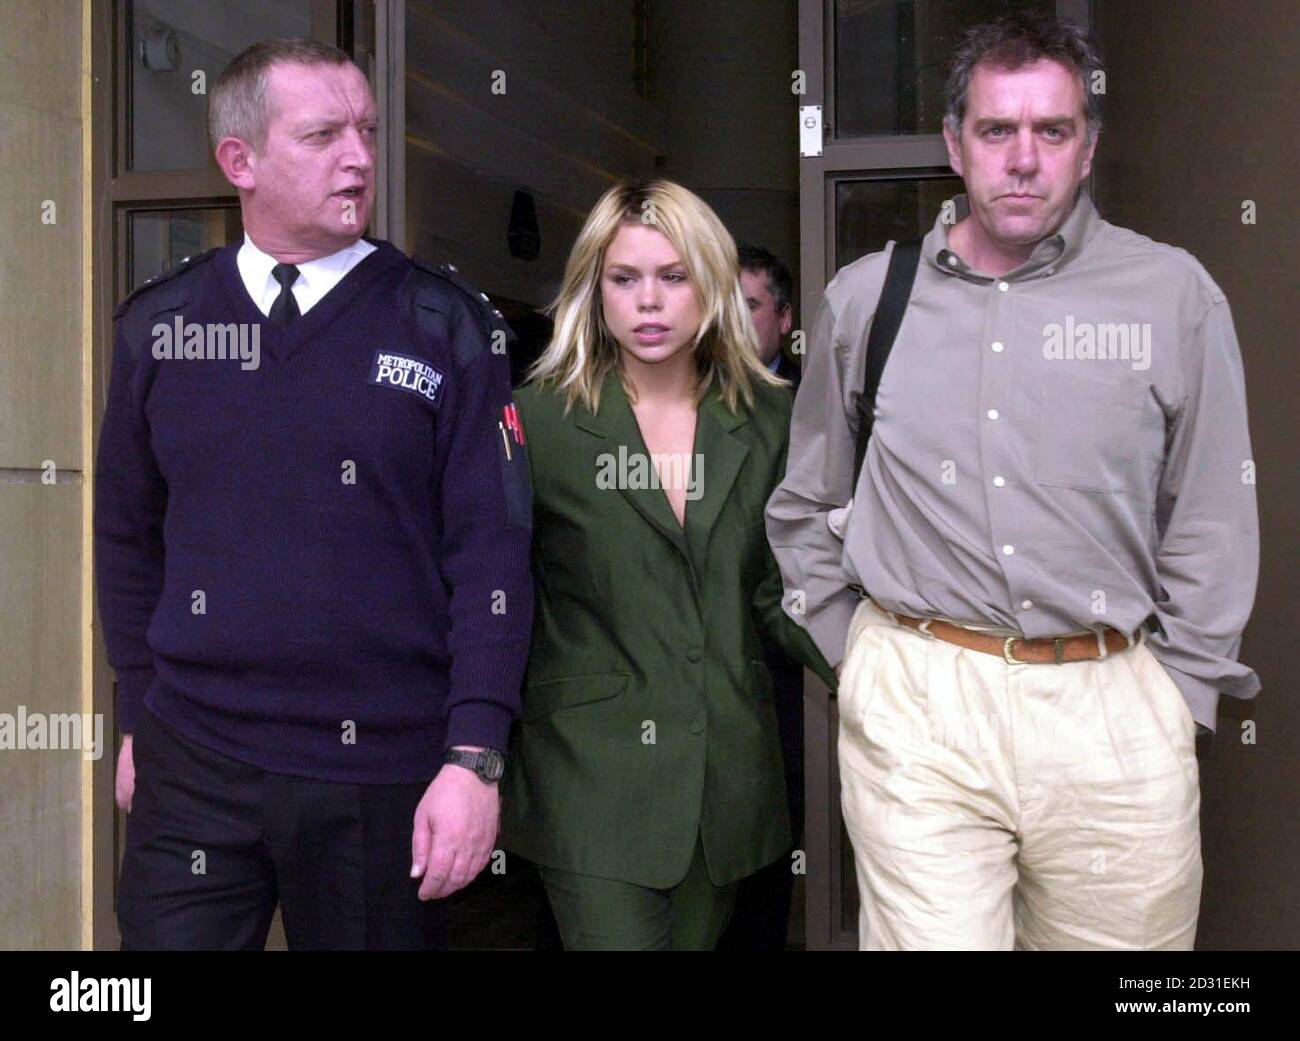 Pop star Billie Piper with father Paul, right, leaving Blackfriars Crown Court, London after giving evidence in the trial of Juliet Peters, 32, who is accused of having made five threats to kill the singer between August 14 and 25 2000.  *  and of four similar charges concerning the pop star's parents.  Stock Photo